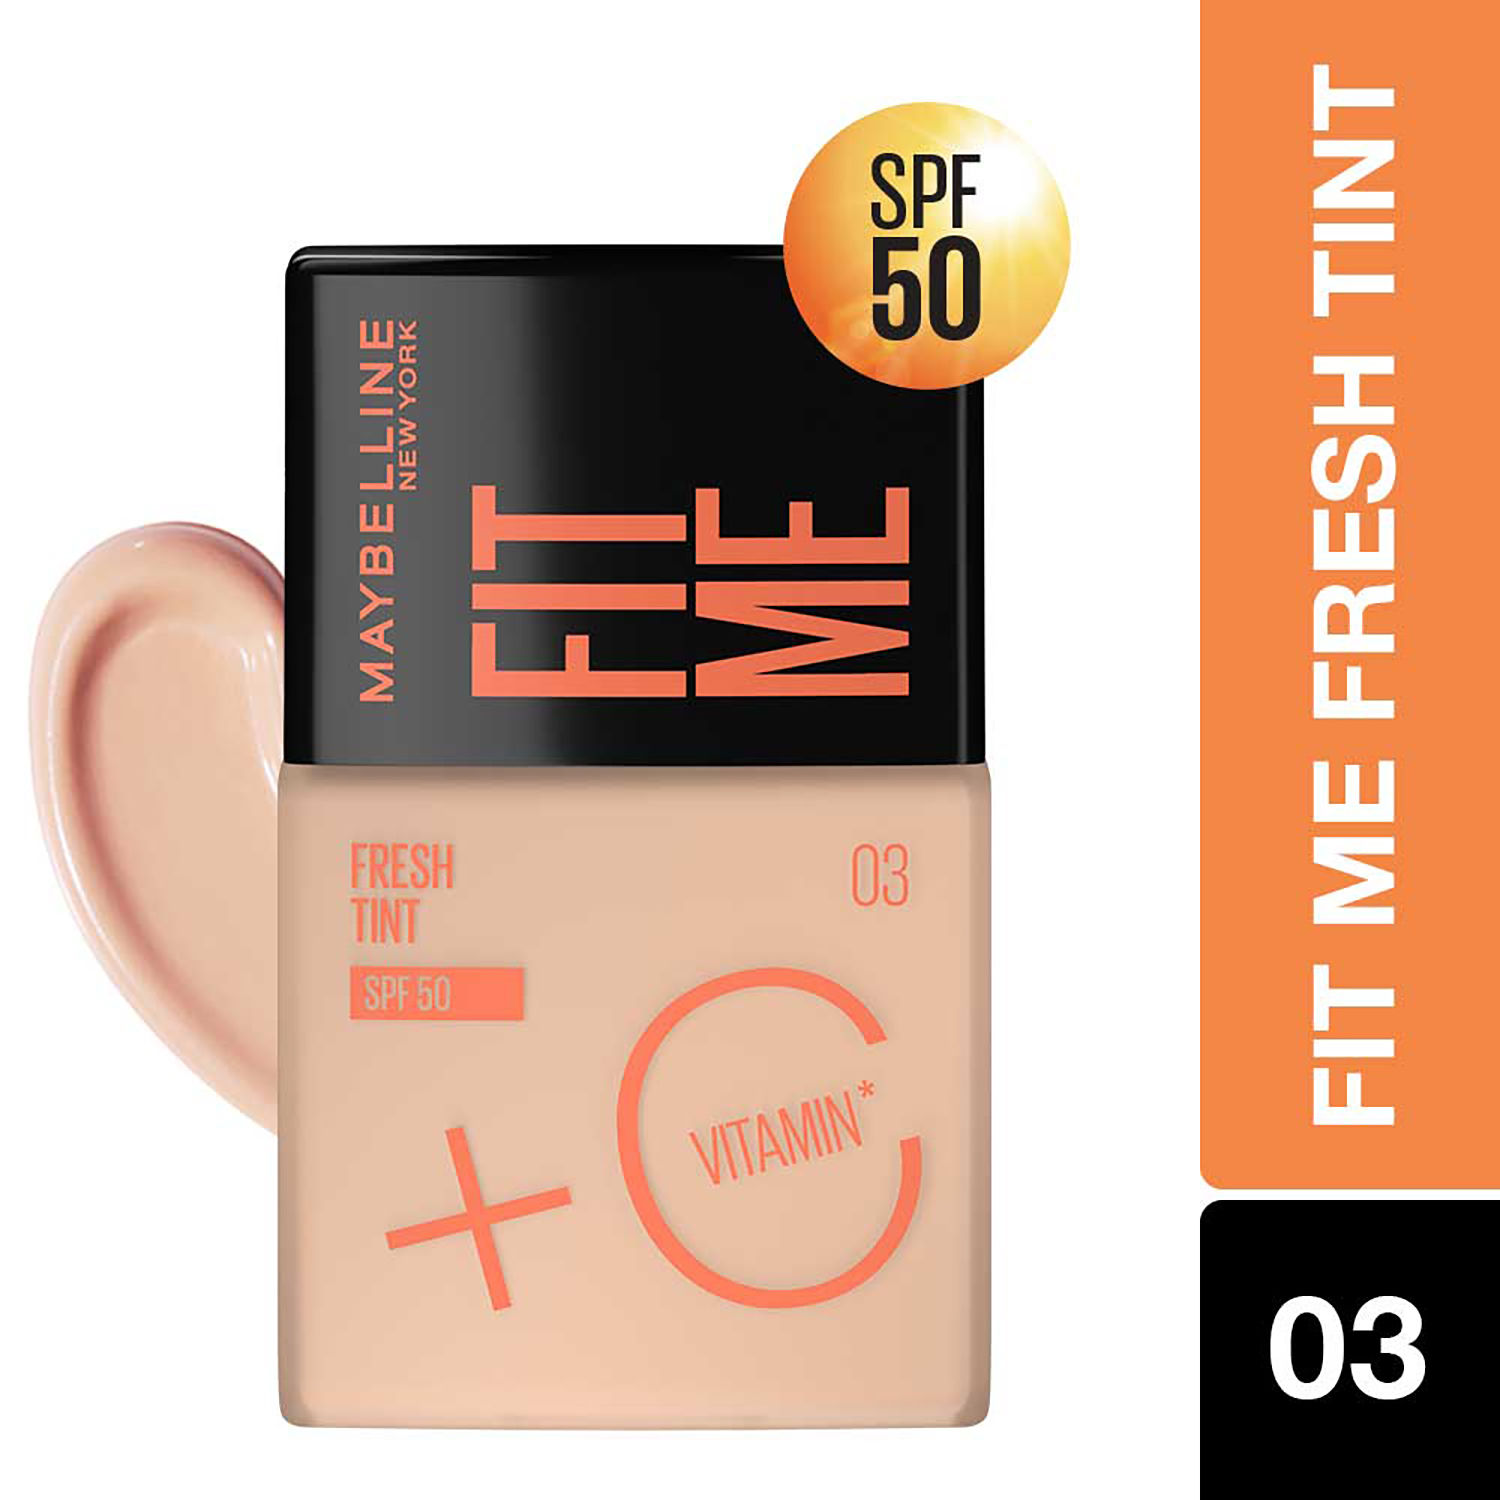 Maybelline New York Fit Me Fresh Tint With SPF 50 & Vitamin C, Shade 03 |  Natural Coverage Skin Tint For Daily Use 30 ml